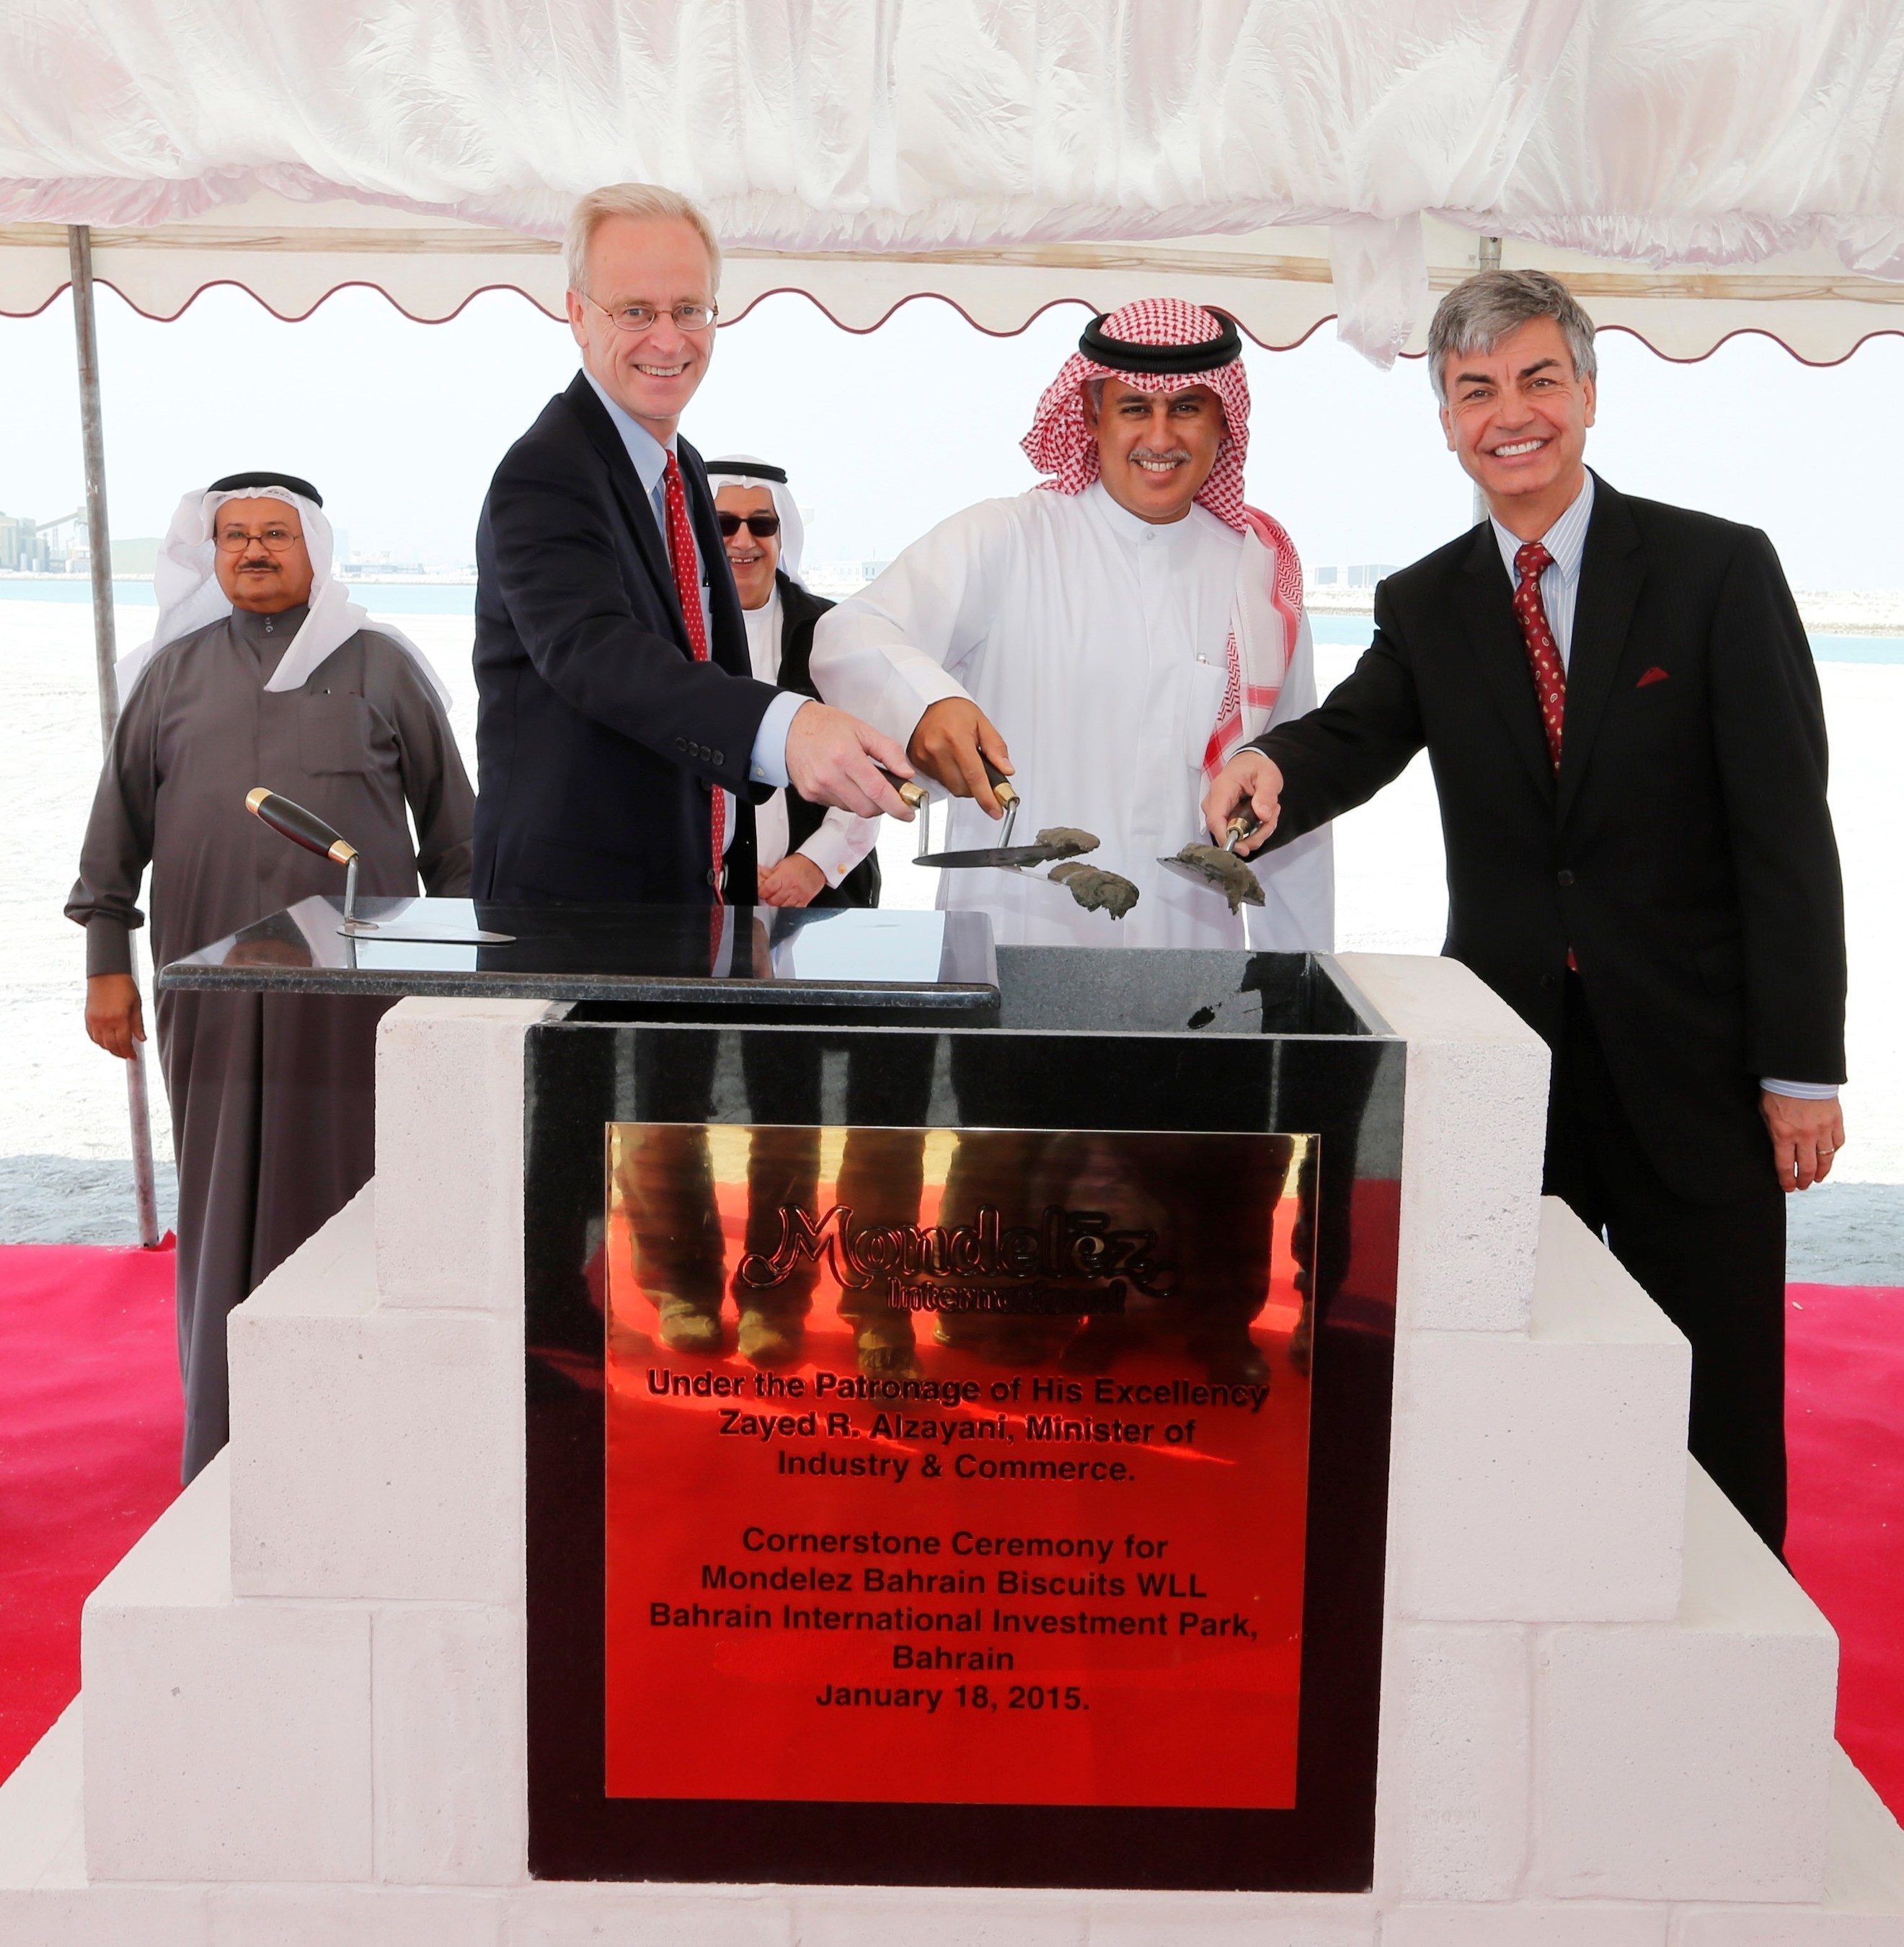 Mondelez International Lays Cornerstone for Construction of $90 Million Biscuit Plant in Bahrain - US Ambassador to Bahrain, William Roebuck; Bahrain's Minister of Industry & Commerce, Zayed R. Alzayani; Mondelez International's Executive Vice President, Integrated Supply Chain, Daniel Myers.